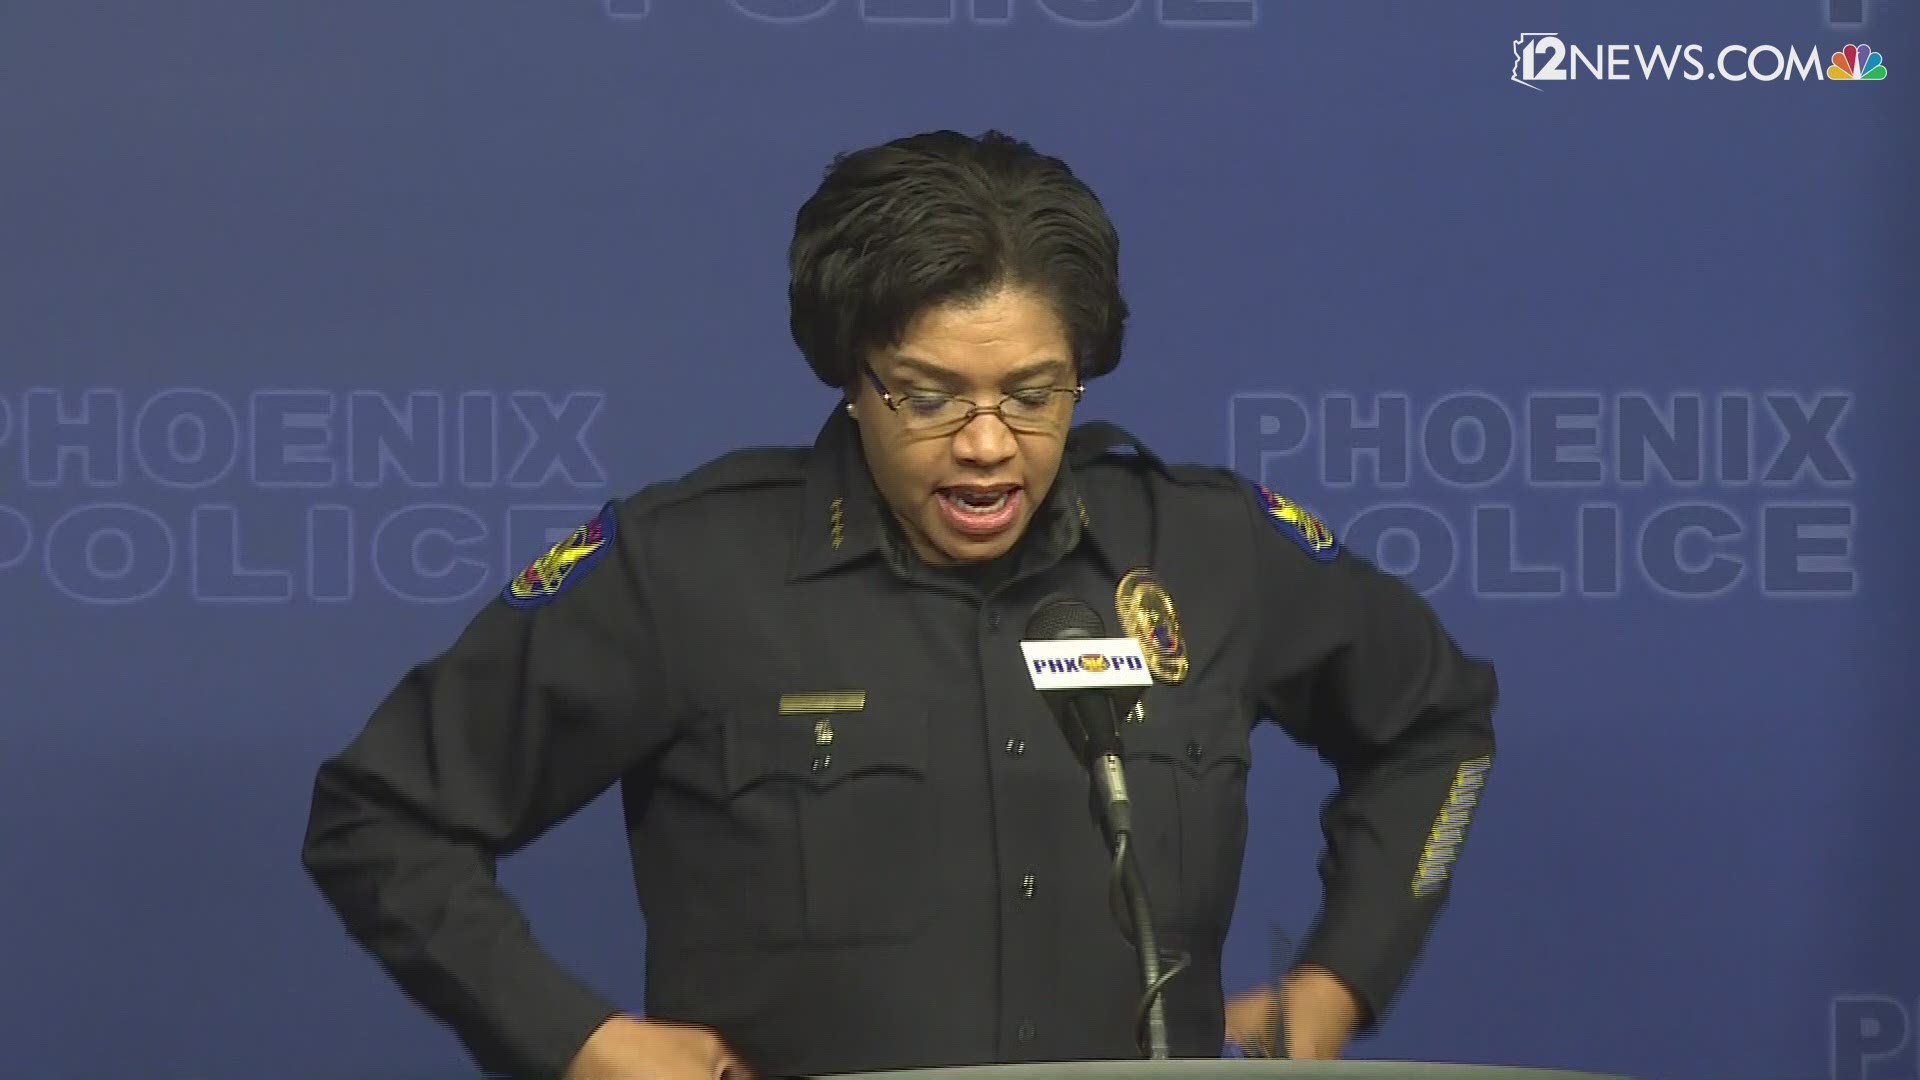 Phoenix Police Chief Jeri Williams says she supports peaceful protests, but her officers will not allow unlawful activity.